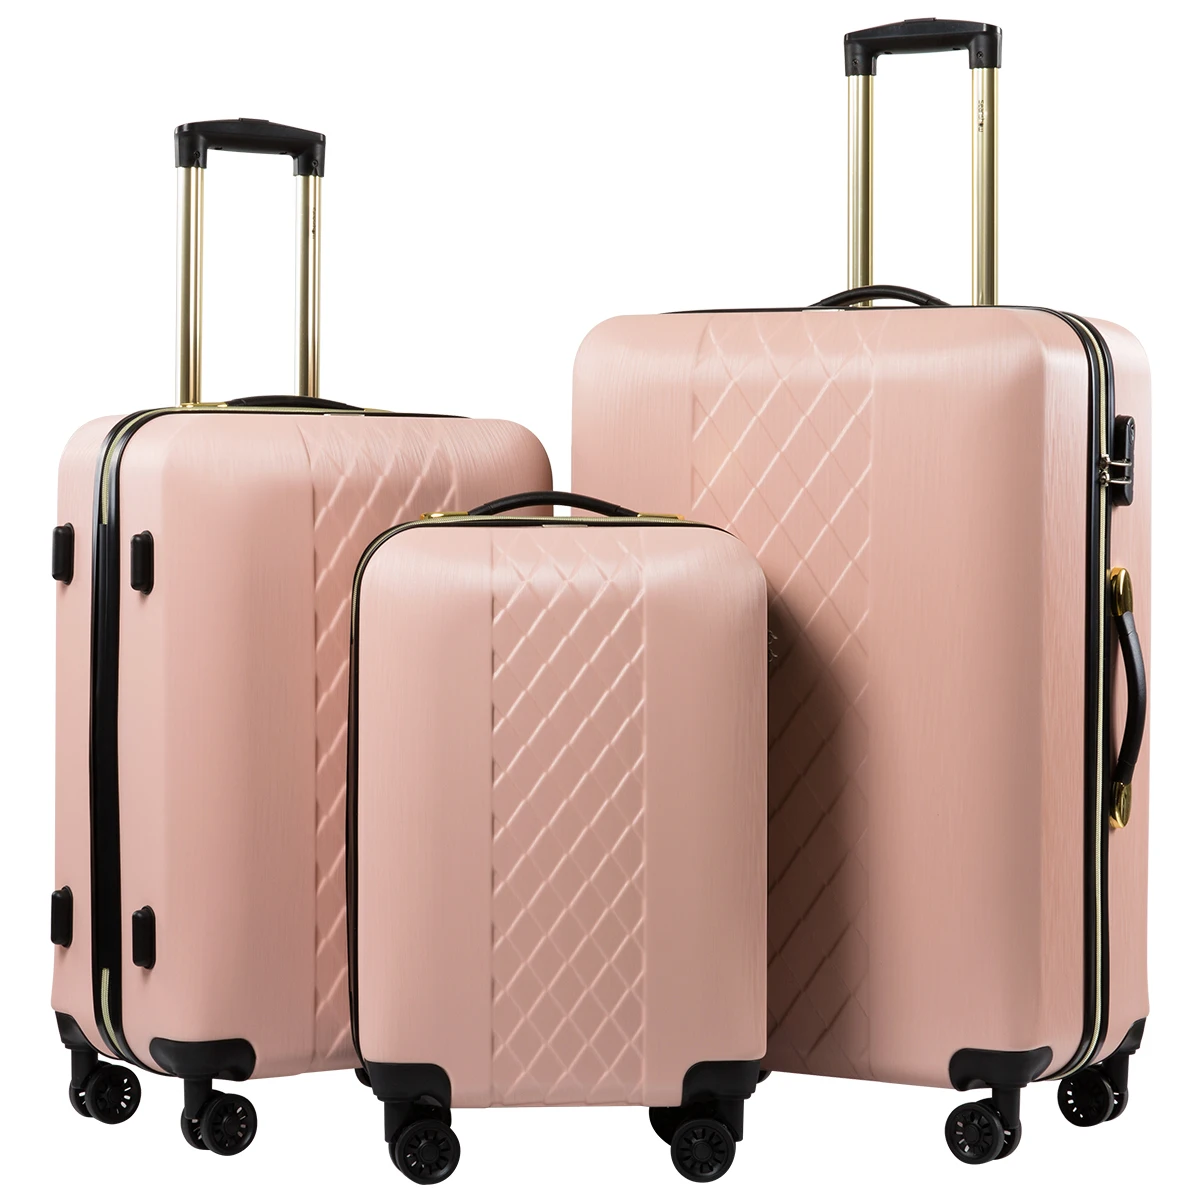 24/28 inch Travel Suitcase set trolley case rolling luggage 20 inch carry on luggage suitcase on wheels travel bags valises 3PCS